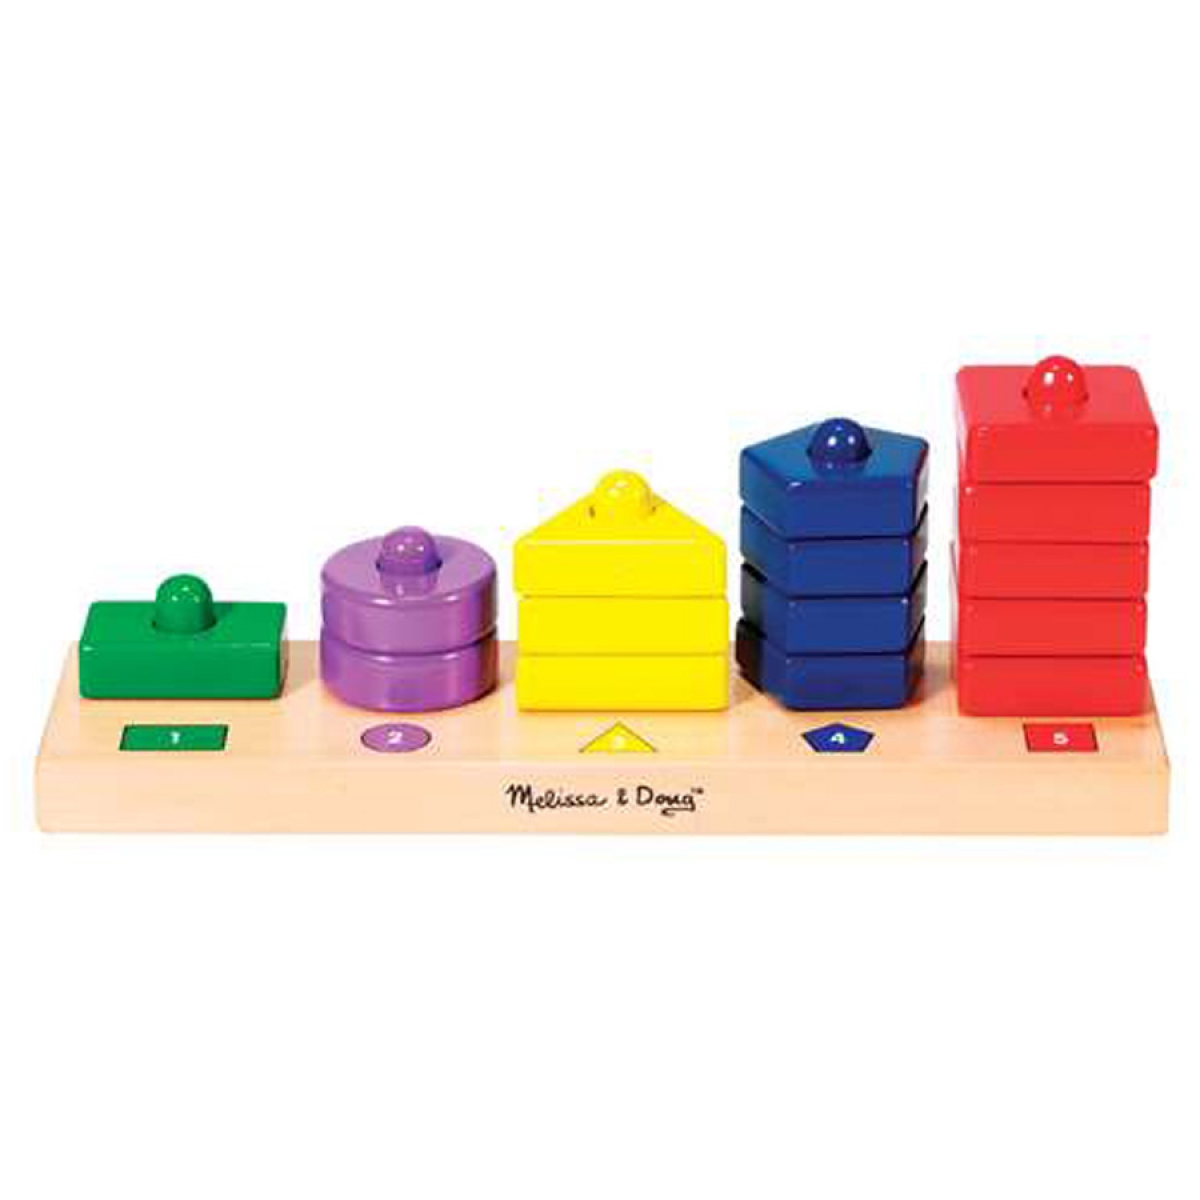 Wooden Educational Toy with 15 Solid Wood Pieces Melissa & Doug Stack and Sort Board